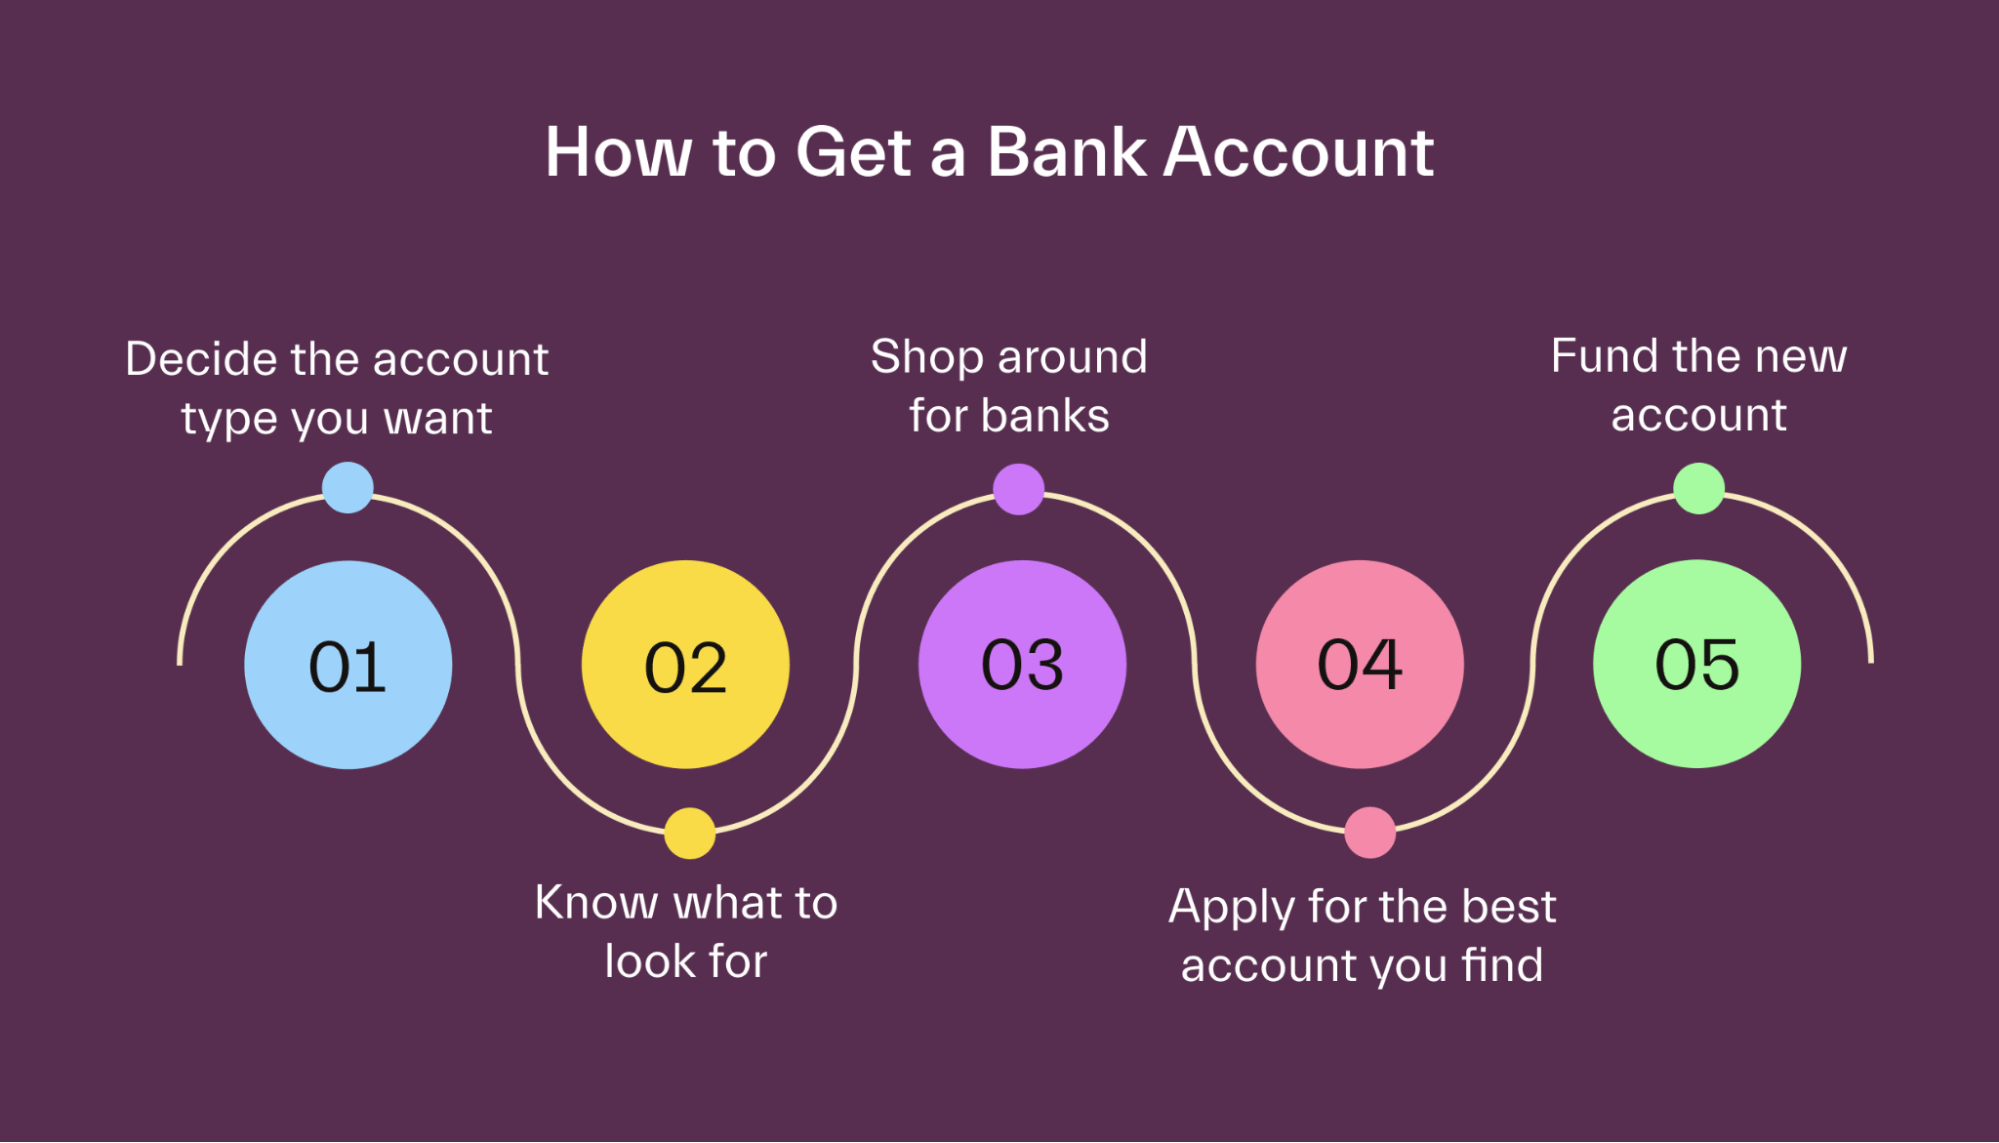 How to Get a Bank Account